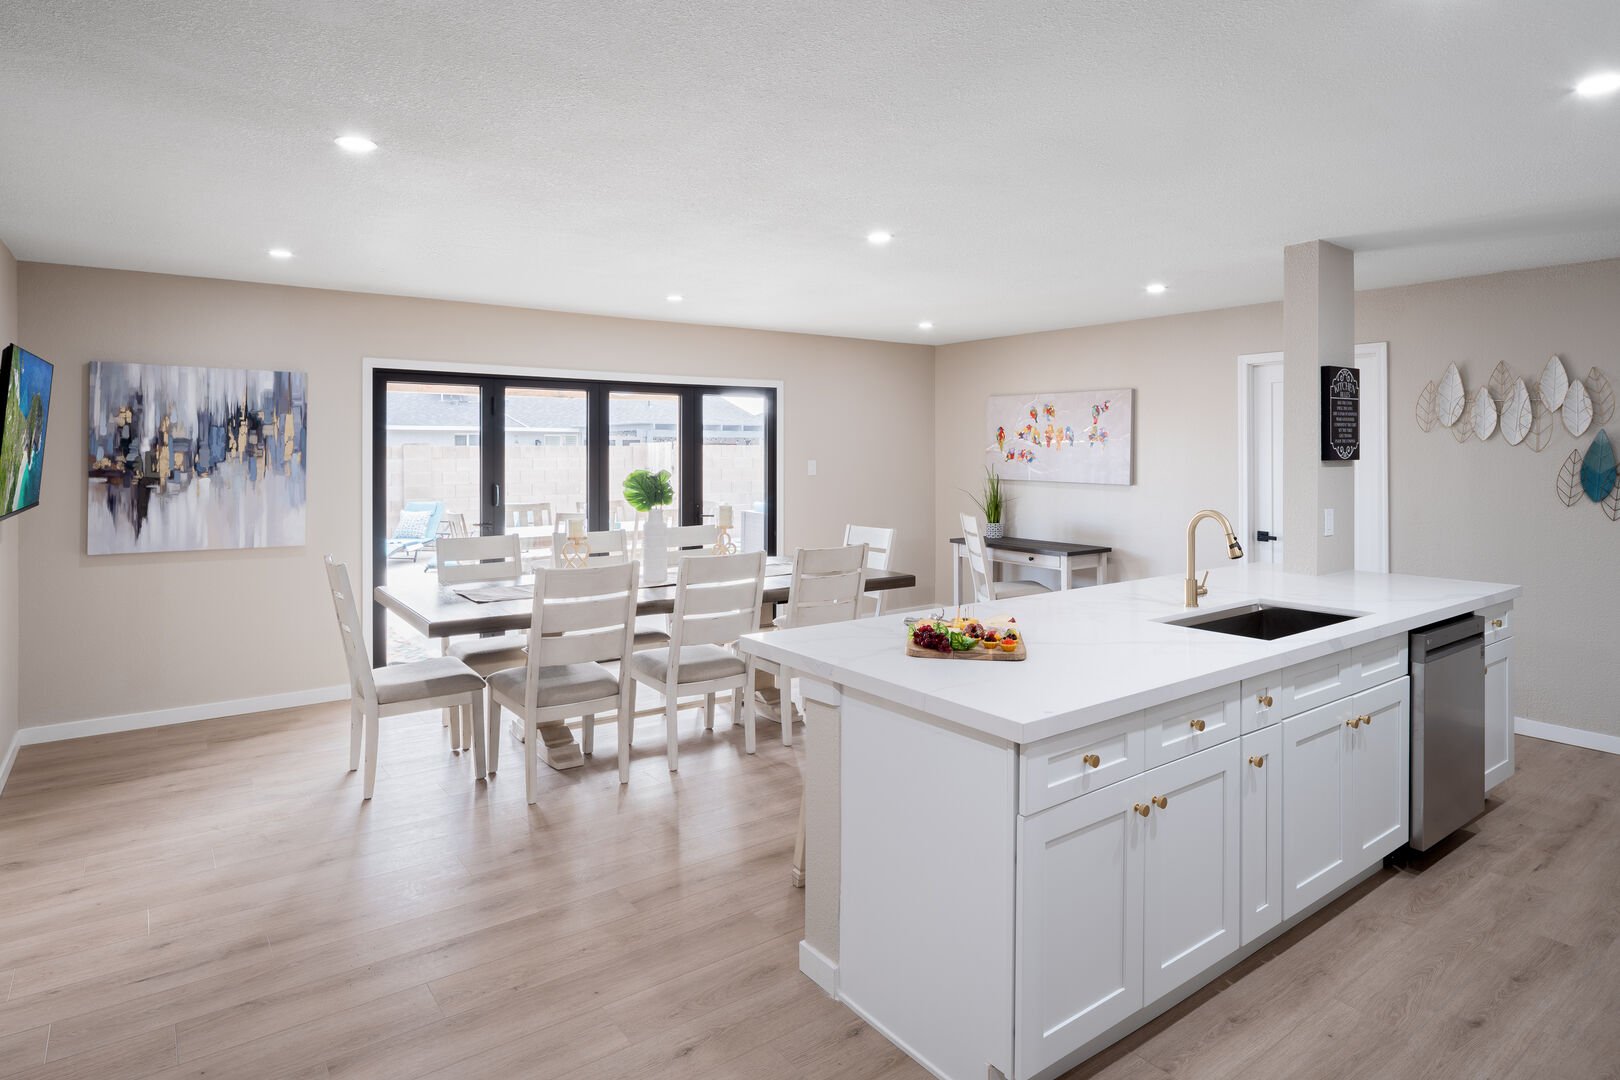 Open concept kitchen with dining room, large island, designated workspace, and fully stocked with all basic cooking essentials